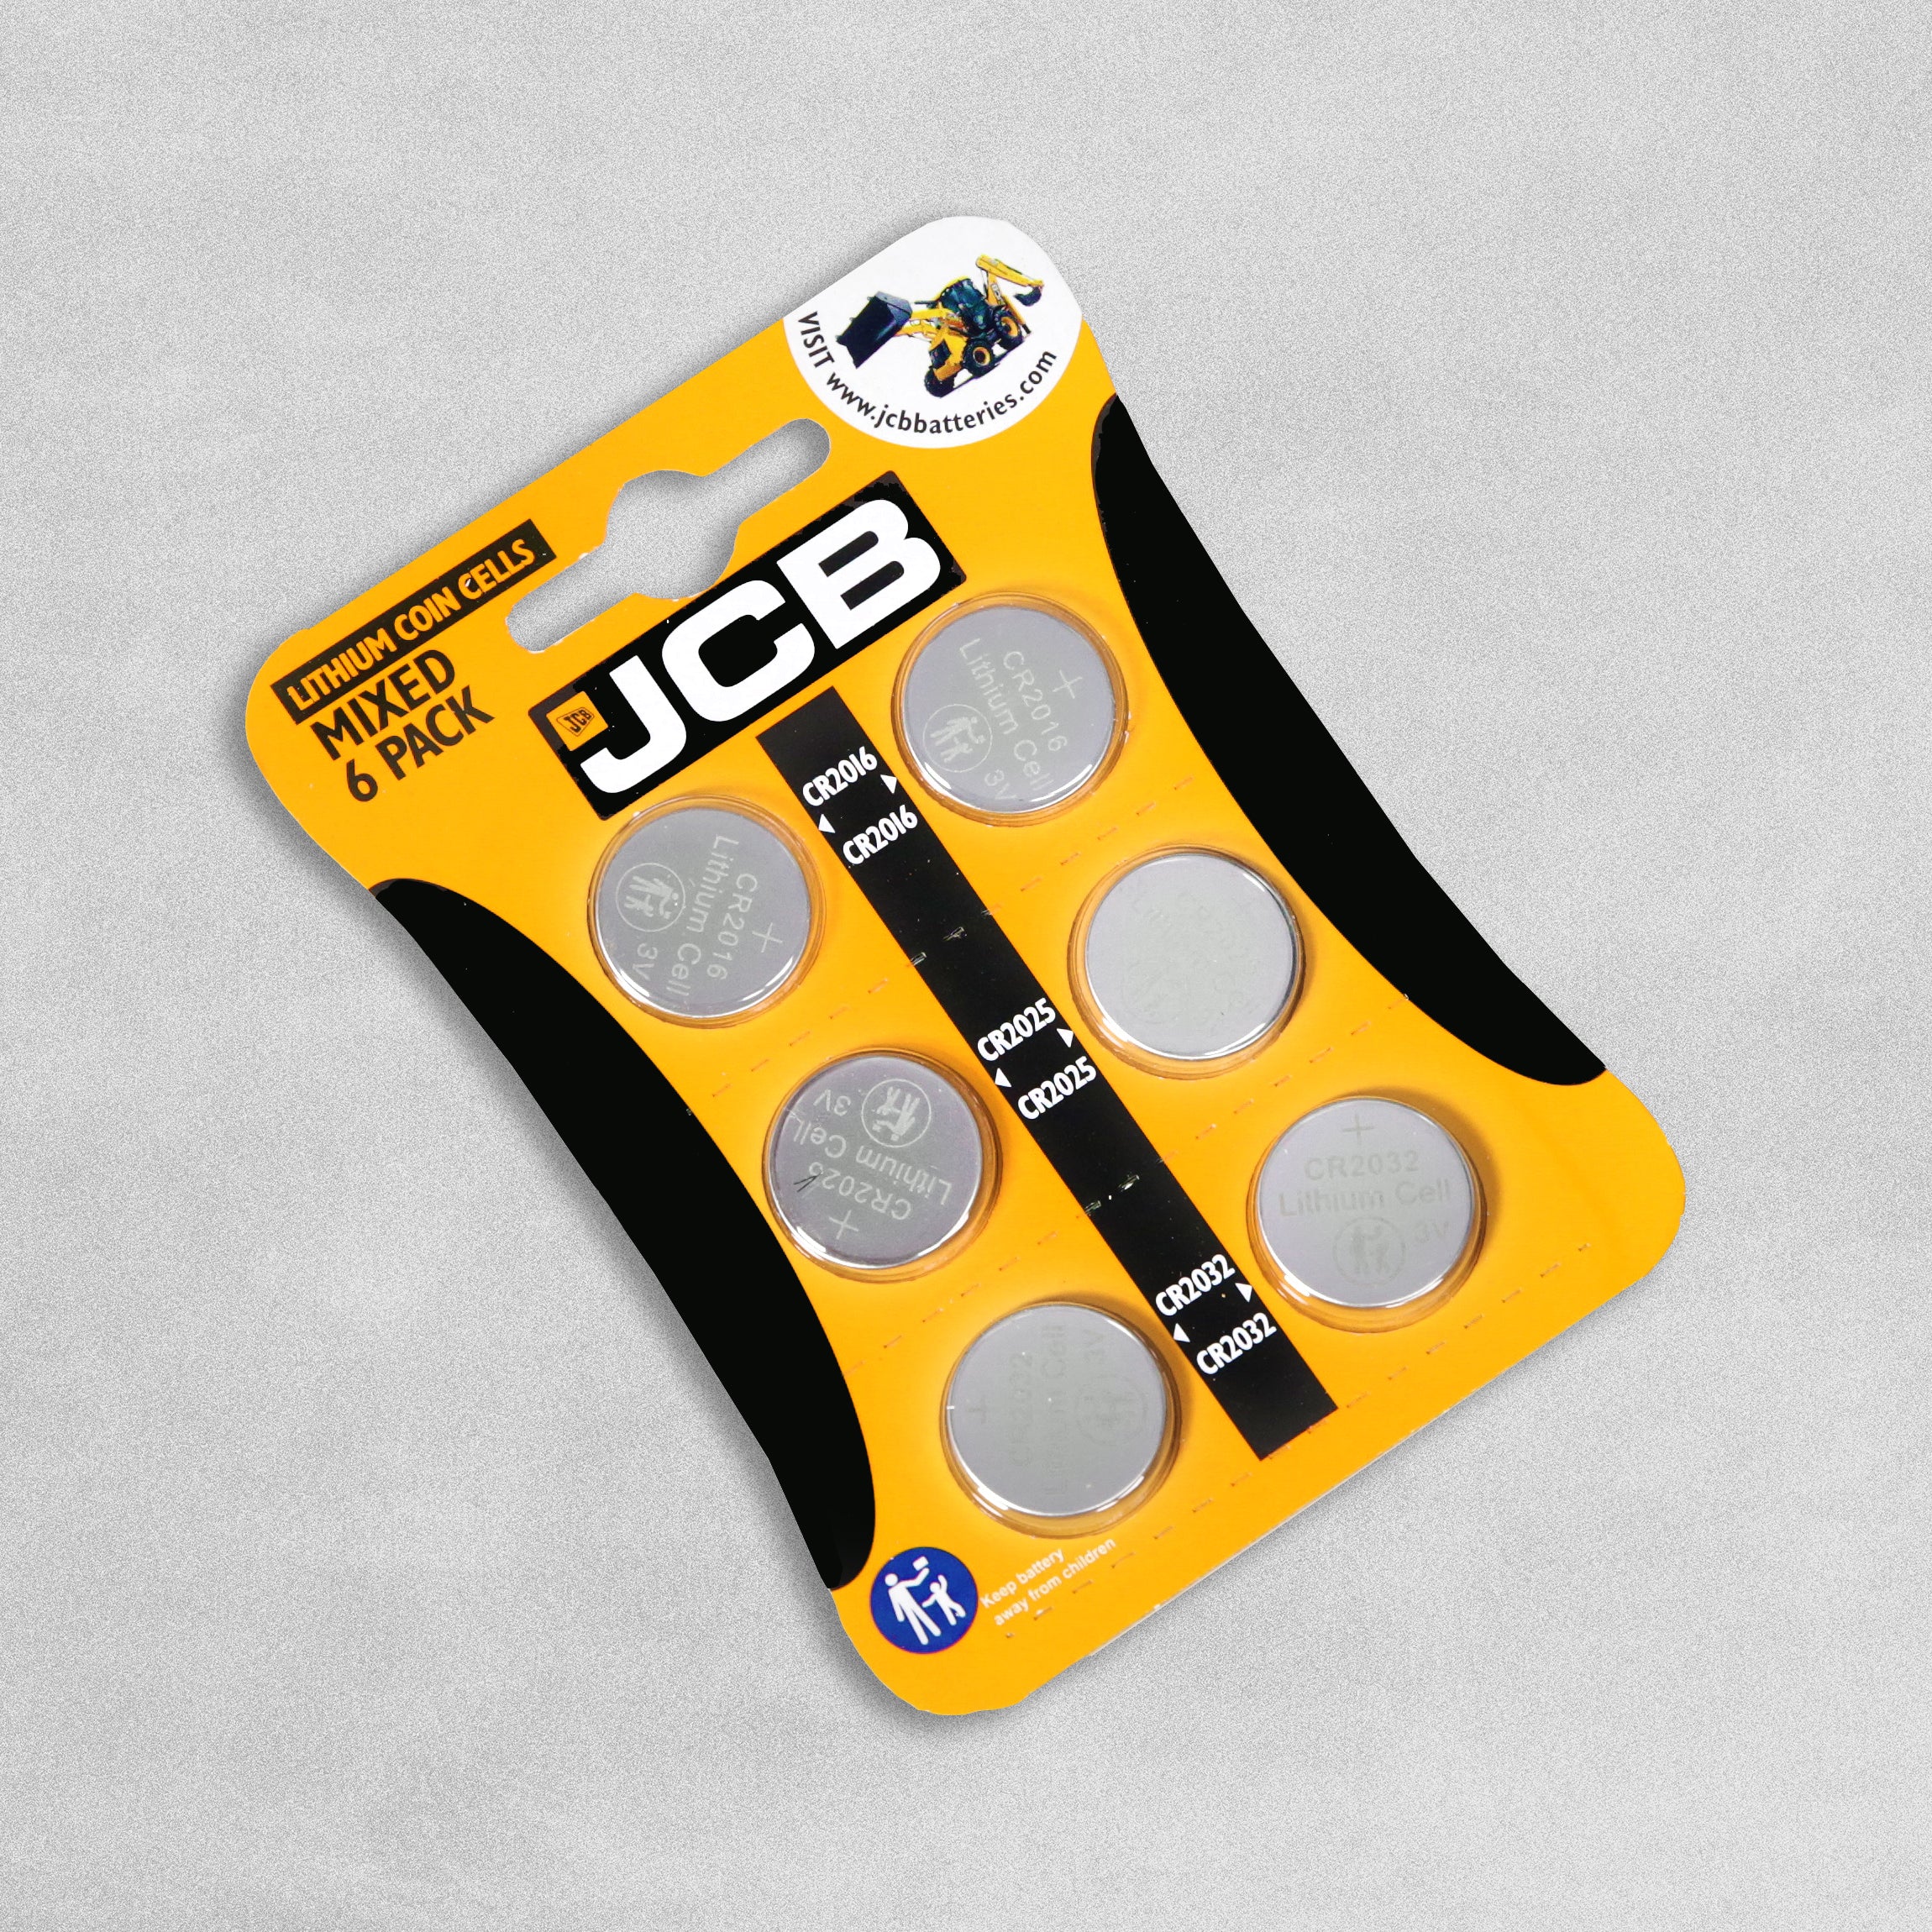 JCB Lithium Coin Cell Batteries - Mixed Pack of 6